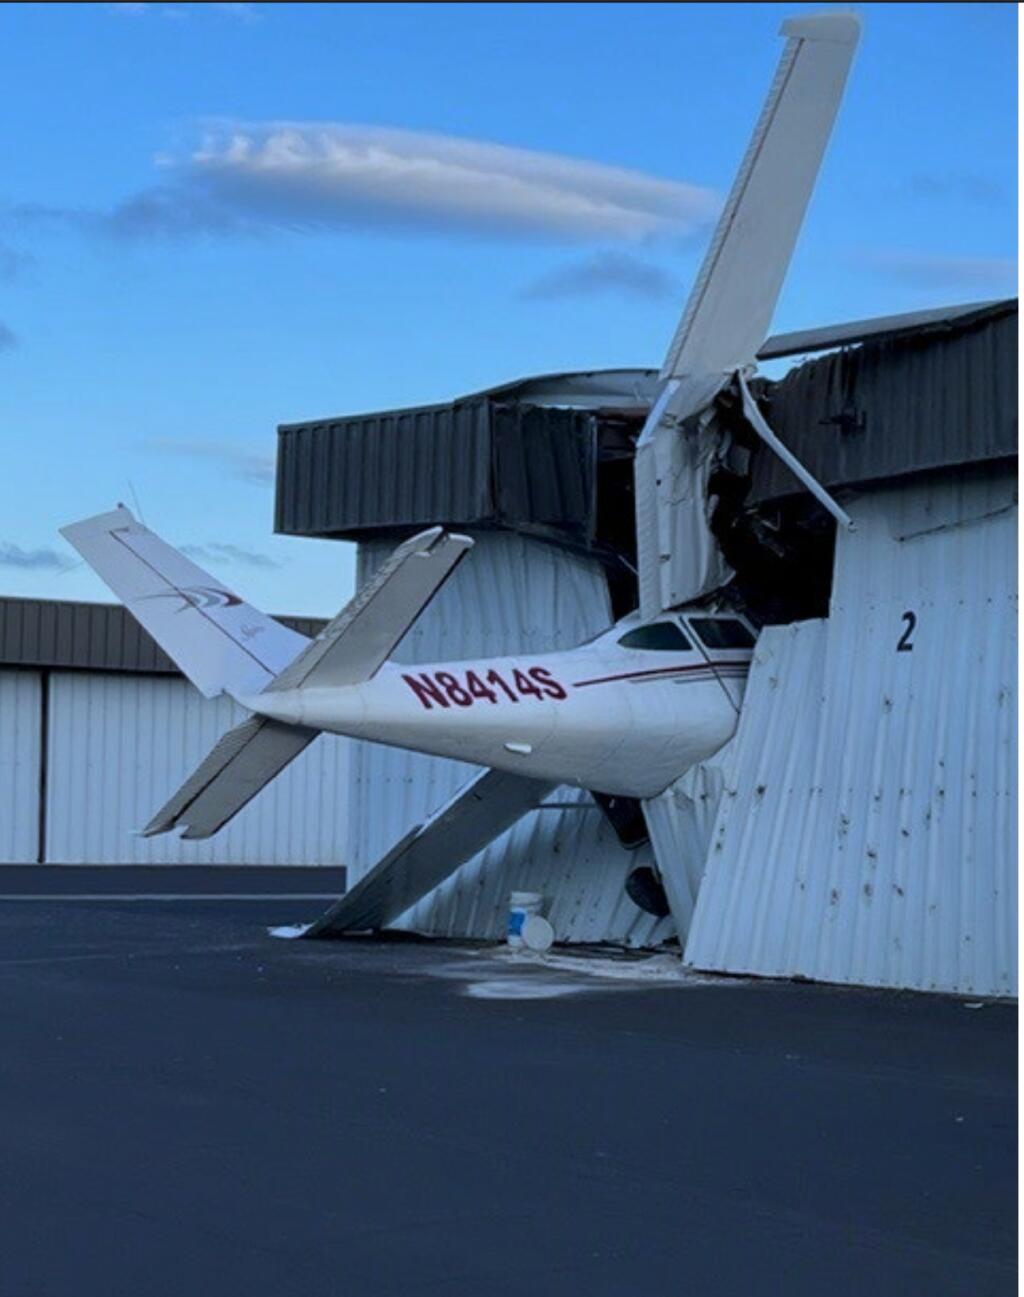 Federal officials have been called in to investigate after a plane crashed into a hangar at the Petaluma Municipal Airport Sunday, July 3. (Petaluma Fire Department)